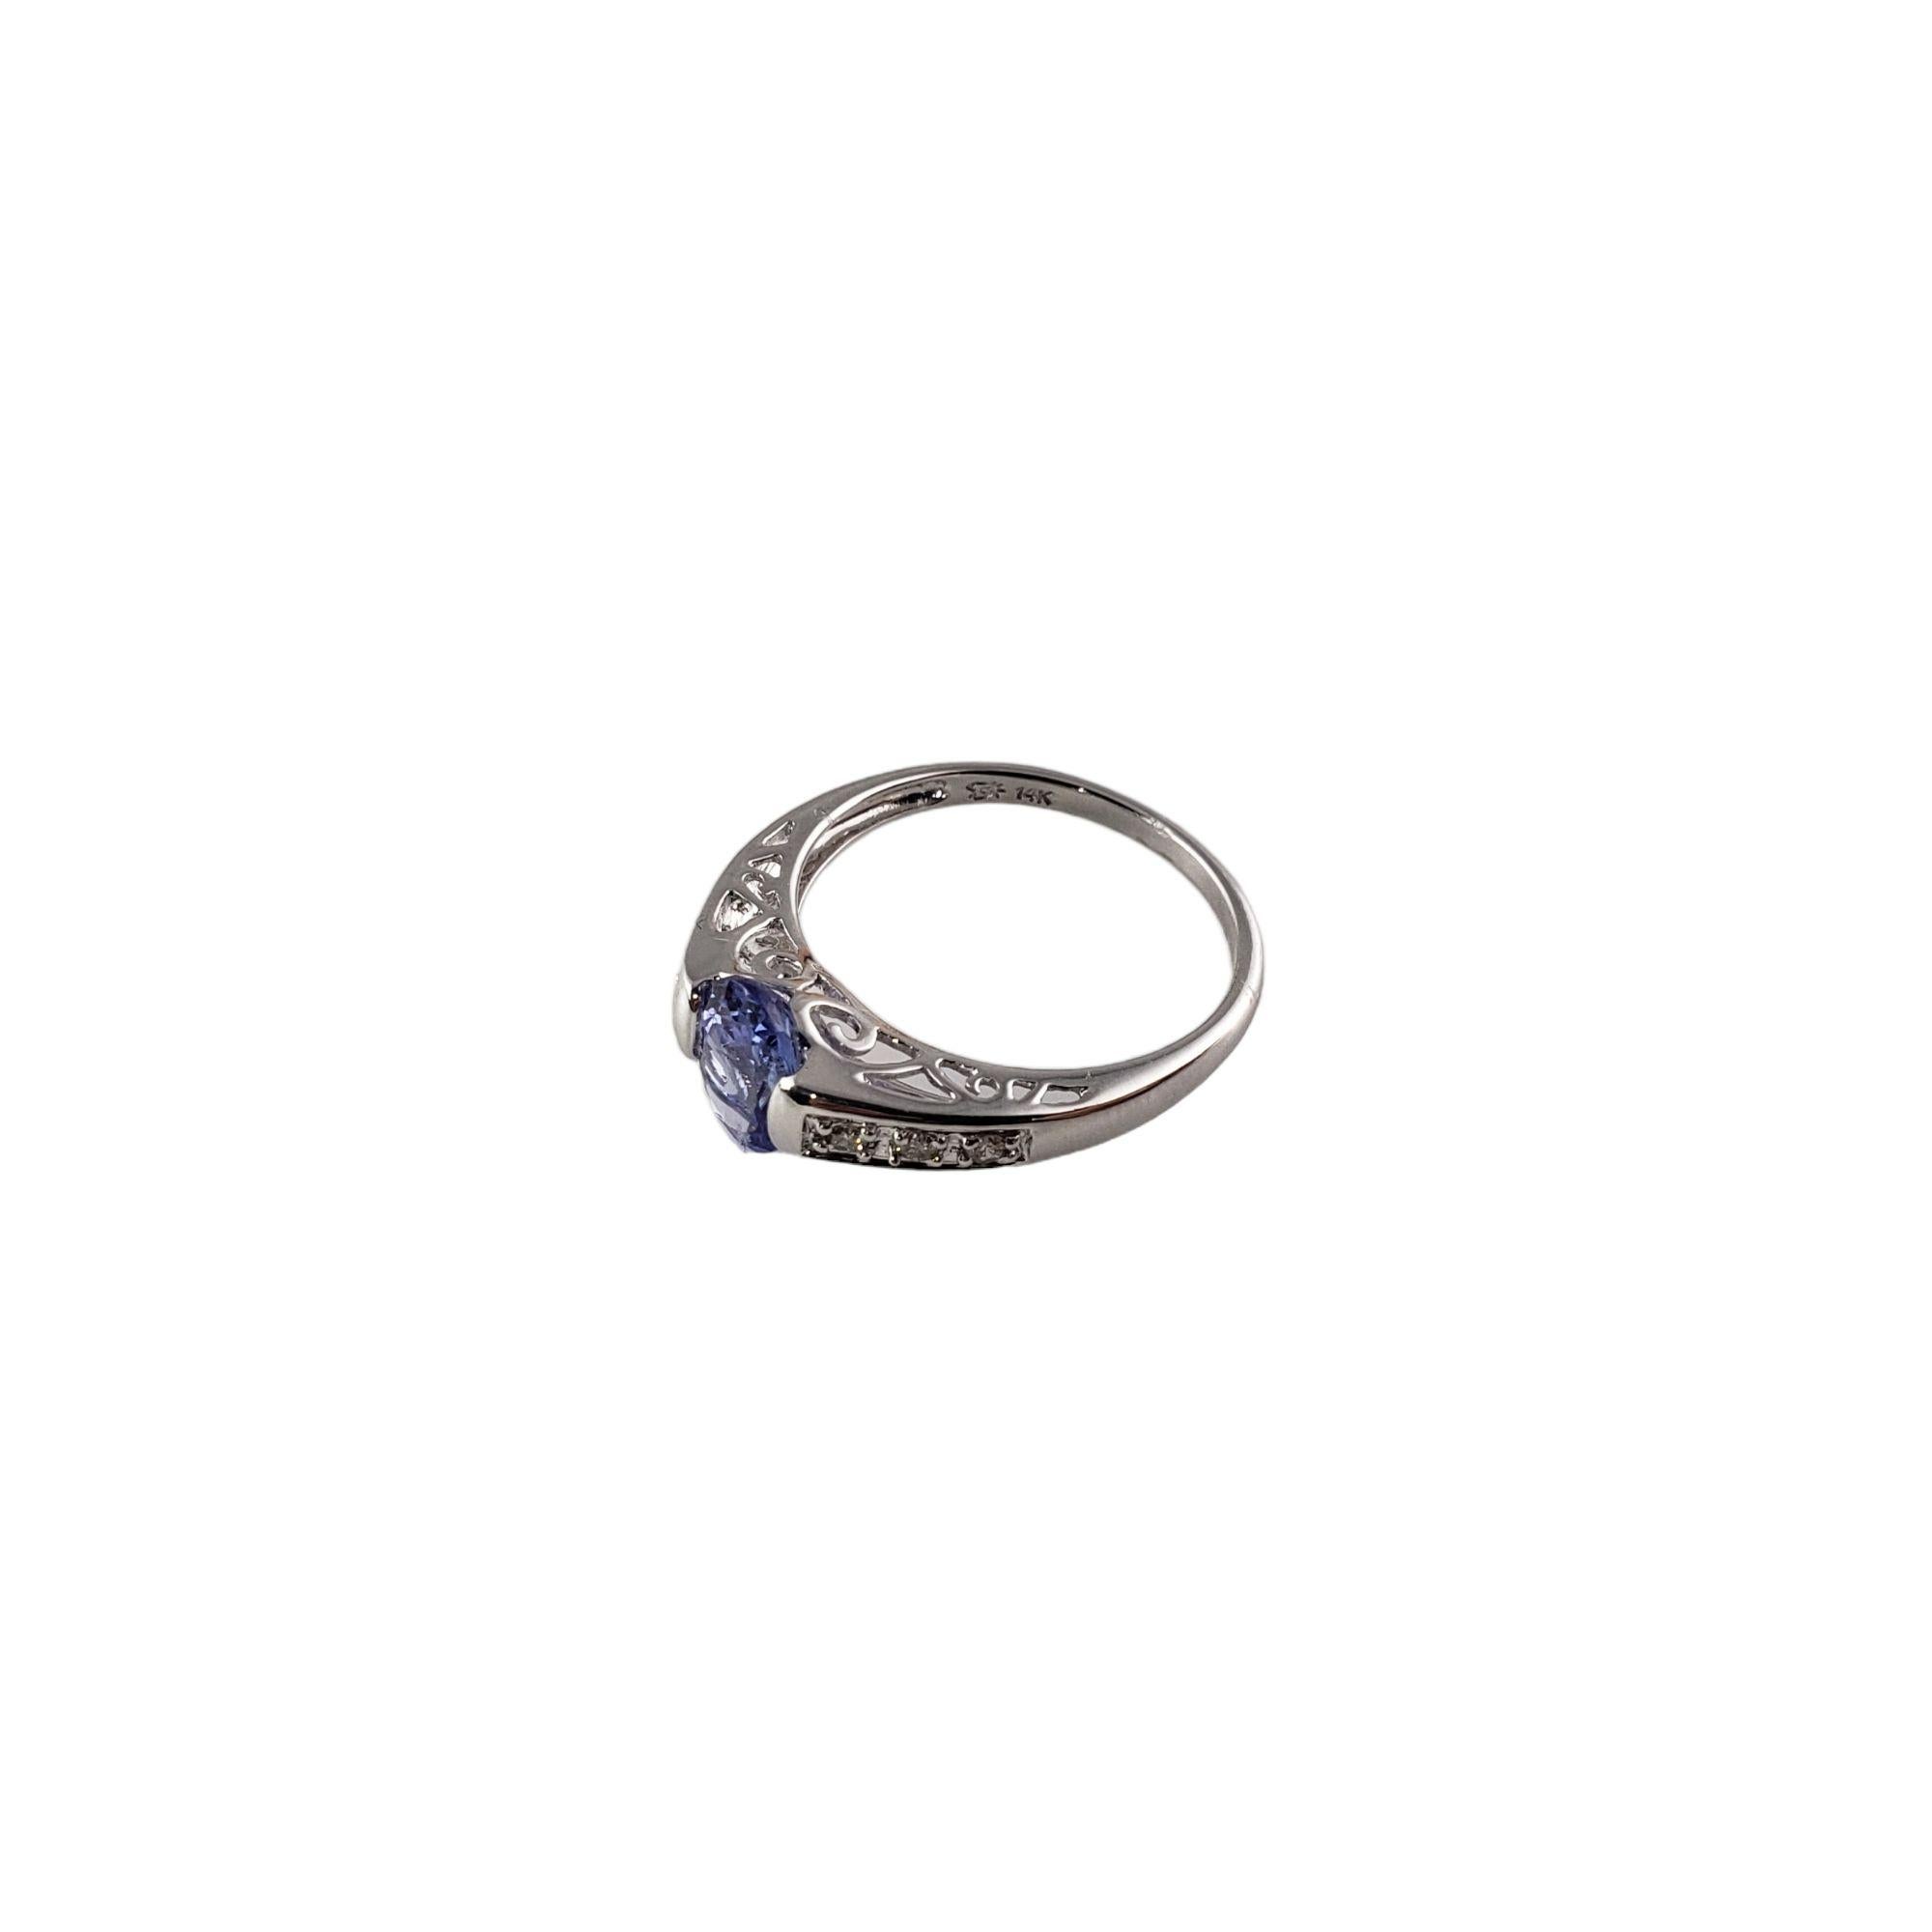 Vintage 14 Karat White Gold Tanzanite and Diamond Ring Size 7 JAGi Certified -

This lovely ring features one oval tanzanite (8 mm x 5 mm) and six round brilliant cut diamonds set in beautifully detailed 14K white gold.
Shank: 2 mm.

Total diamond